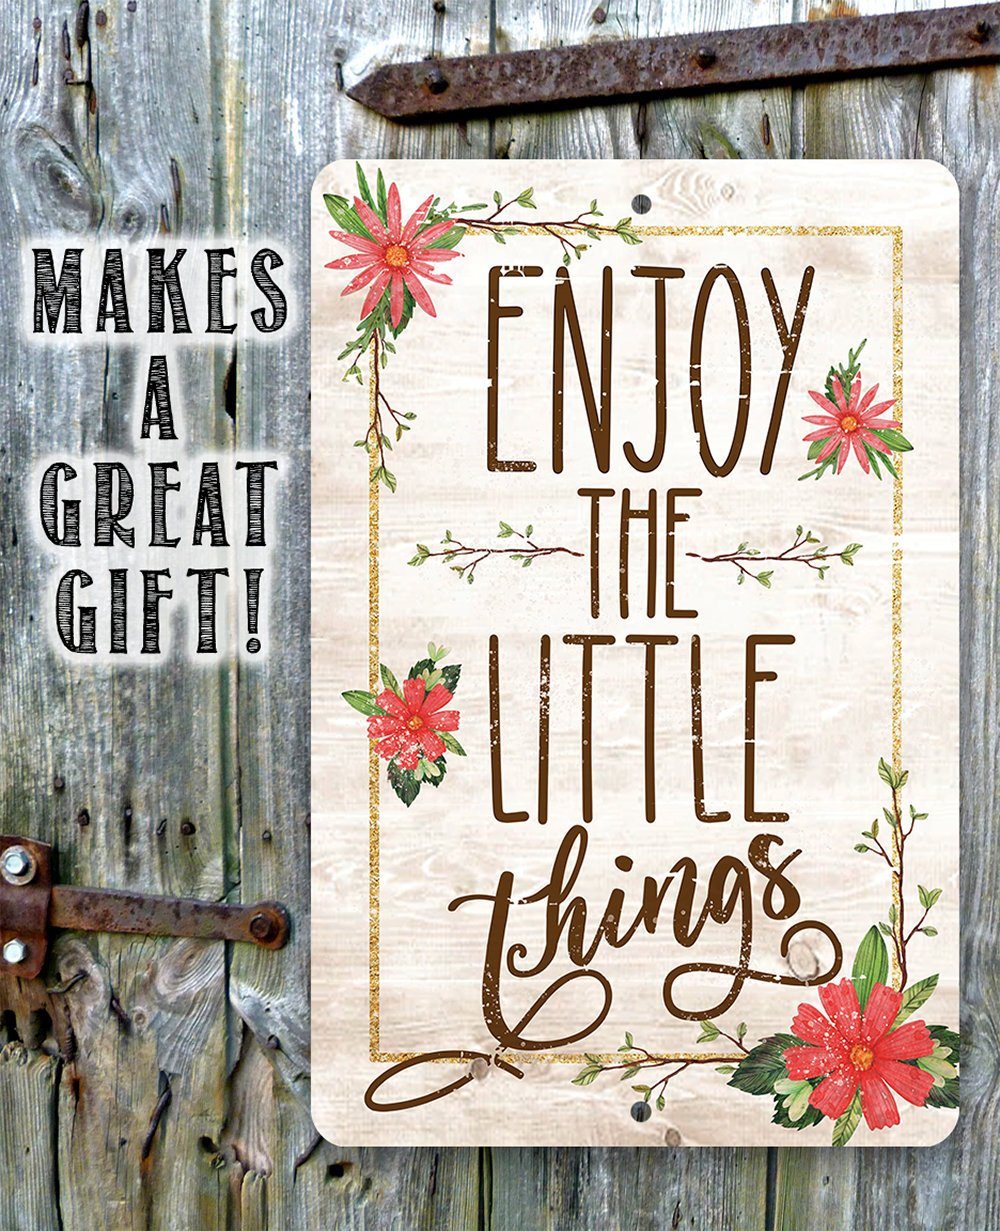 Enjoy The Little Things - Metal Sign | Lone Star Art.